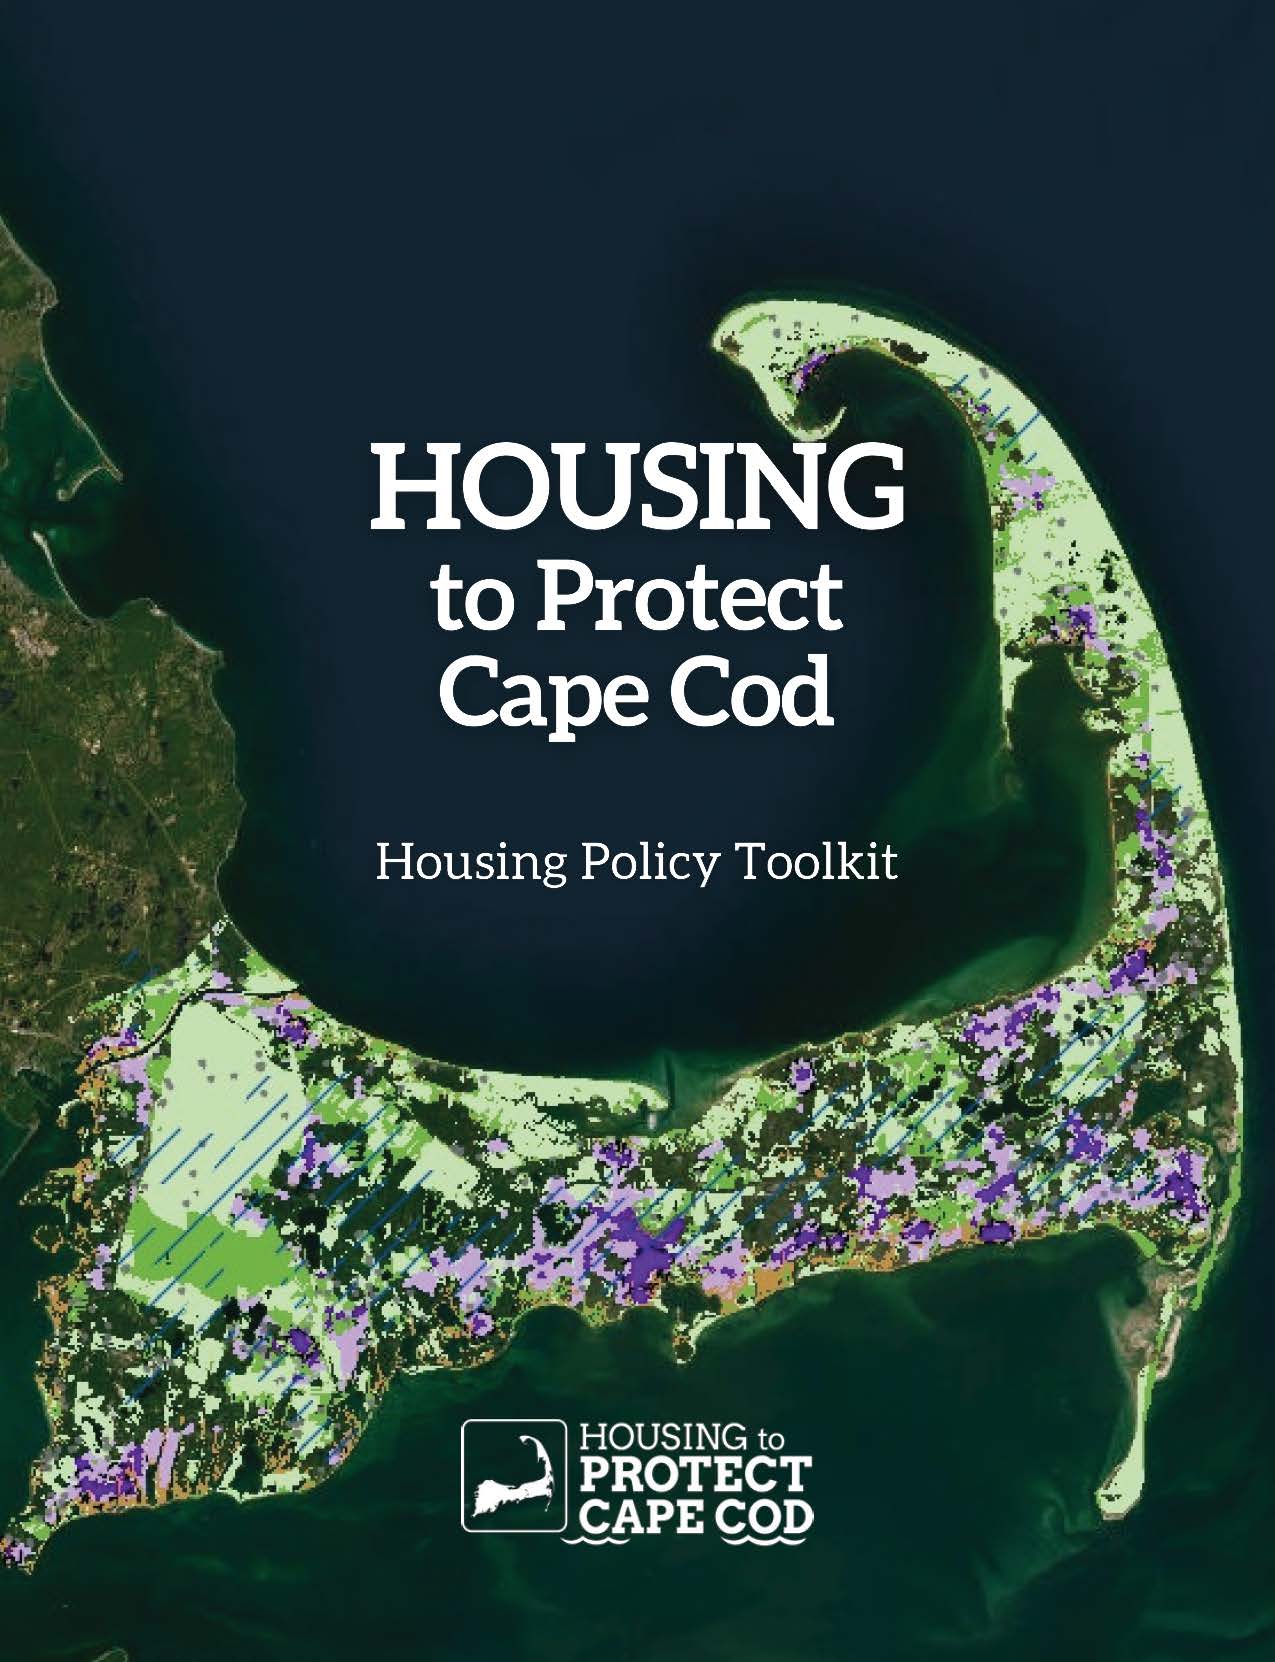 Housing to Protect Cape Cod Housing Policy Toolkit